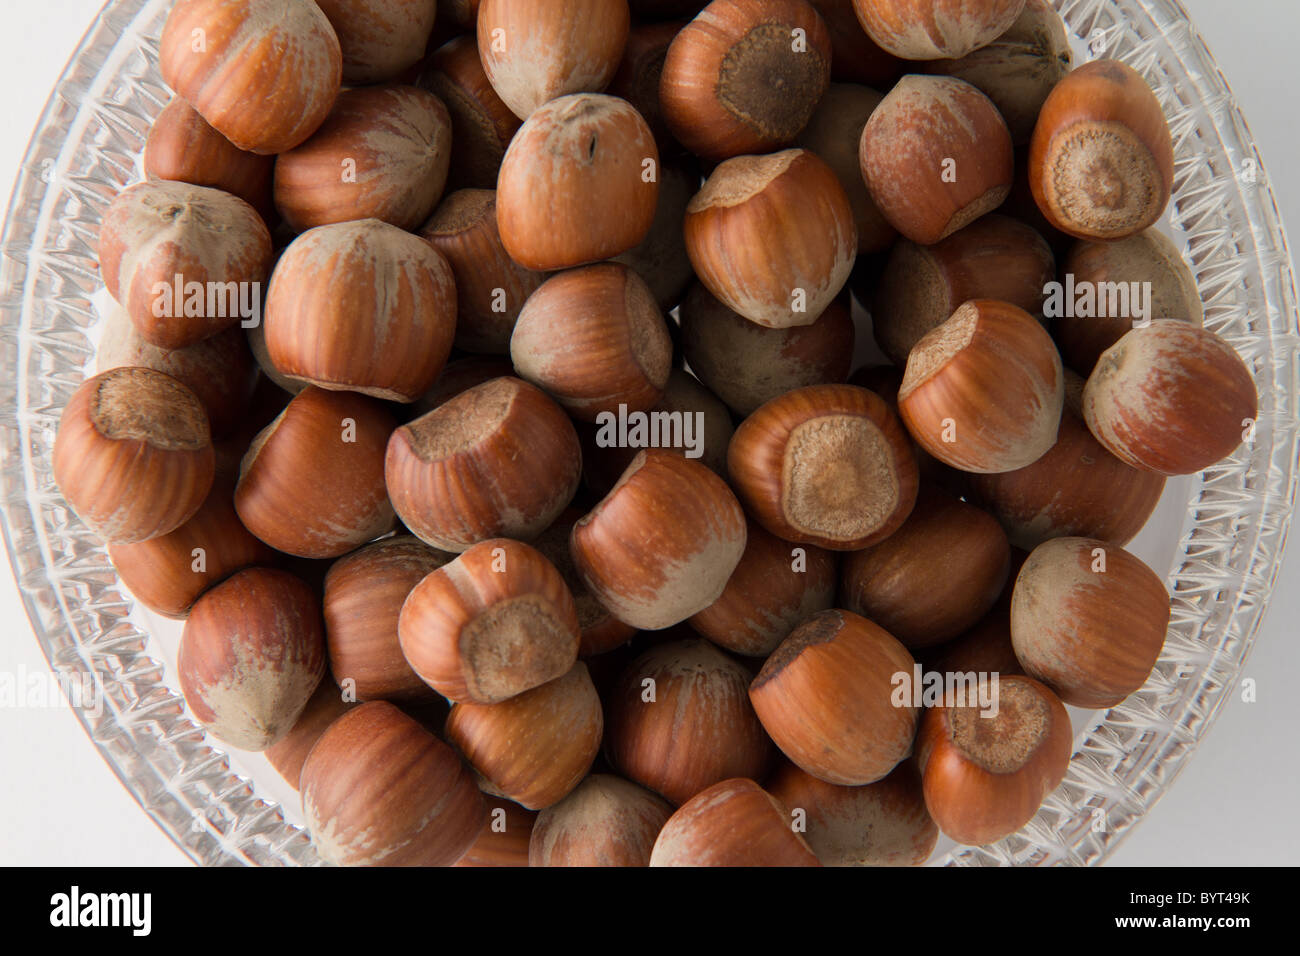 Top view of hazelnuts in glass bowl Stock Photo